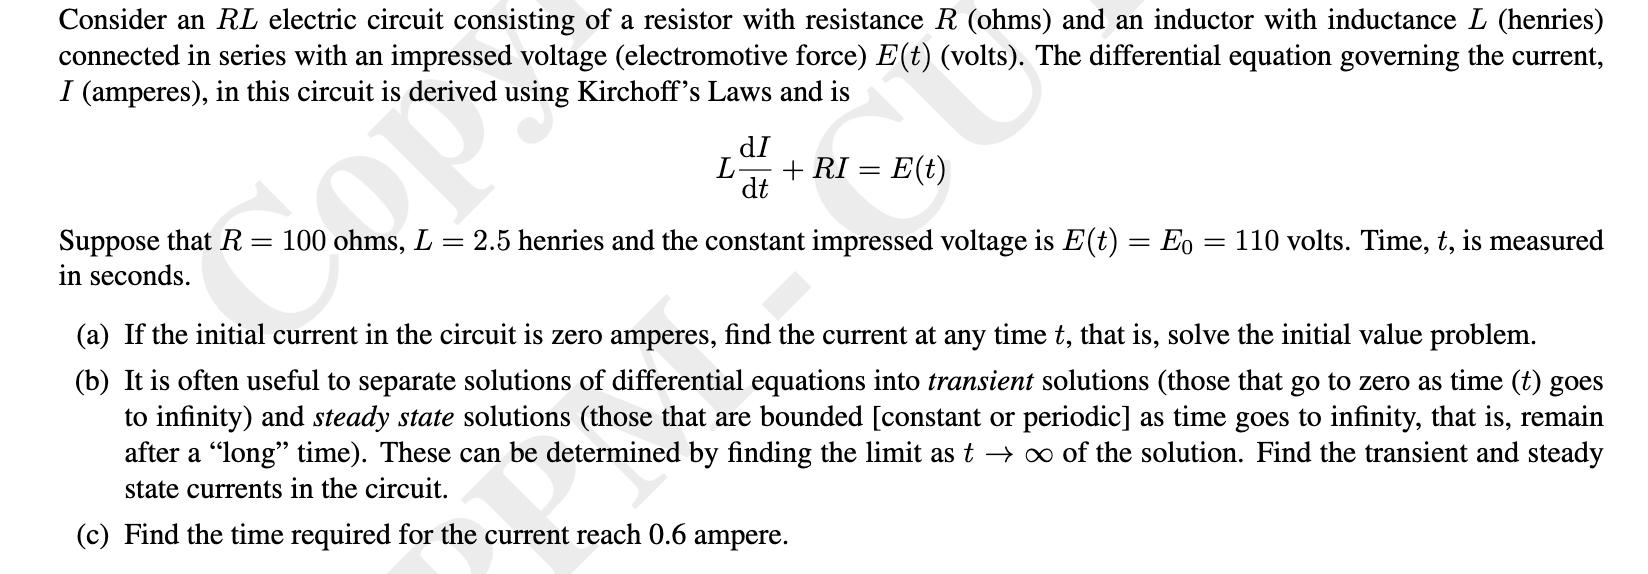 Consider an RL electric circuit consisting of a resistor with resistance R (ohms) and an inductor with